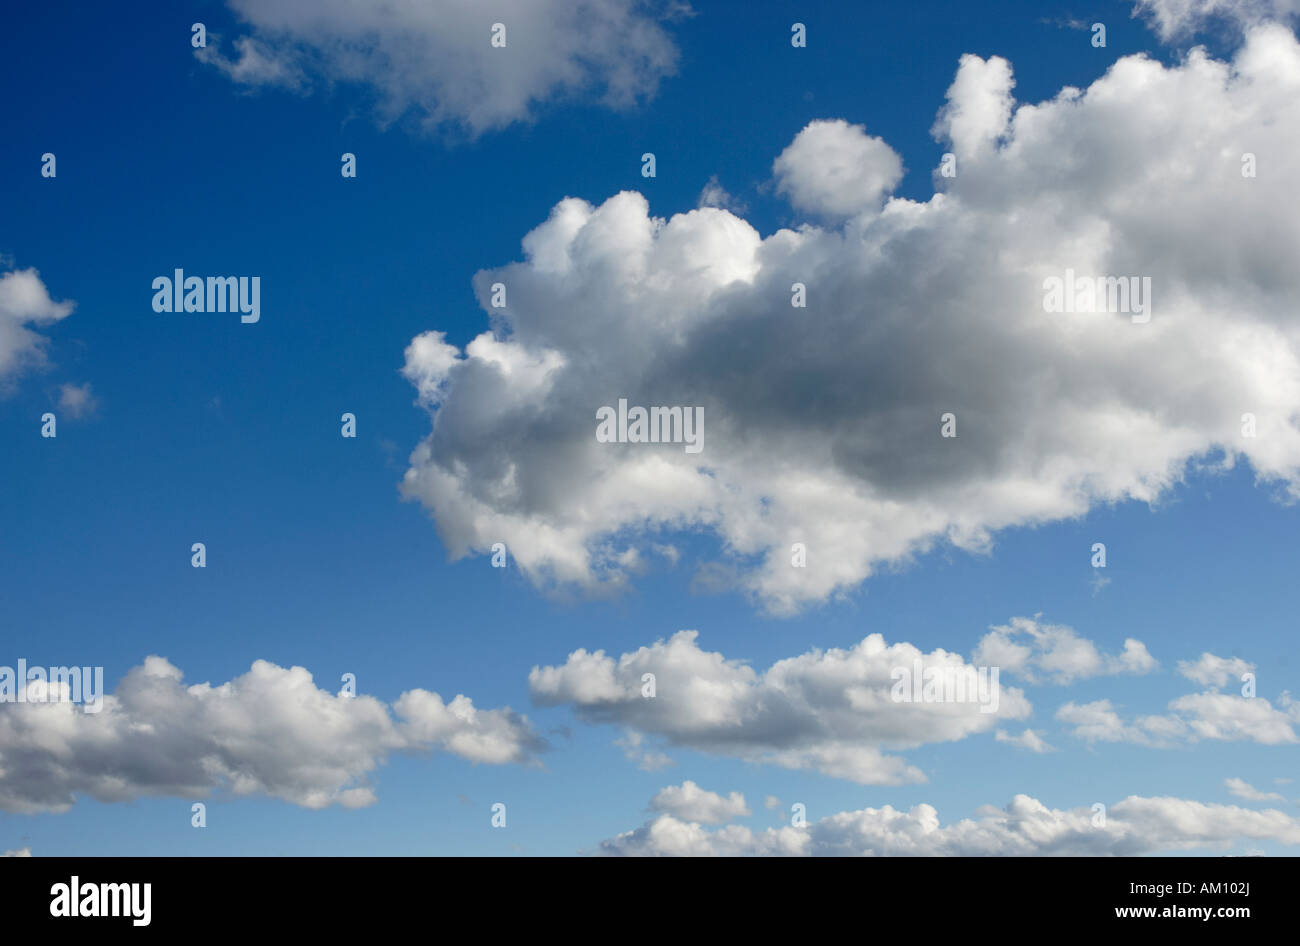 Fast flying cumulus clouds on brilliant bue sky Stock Photo